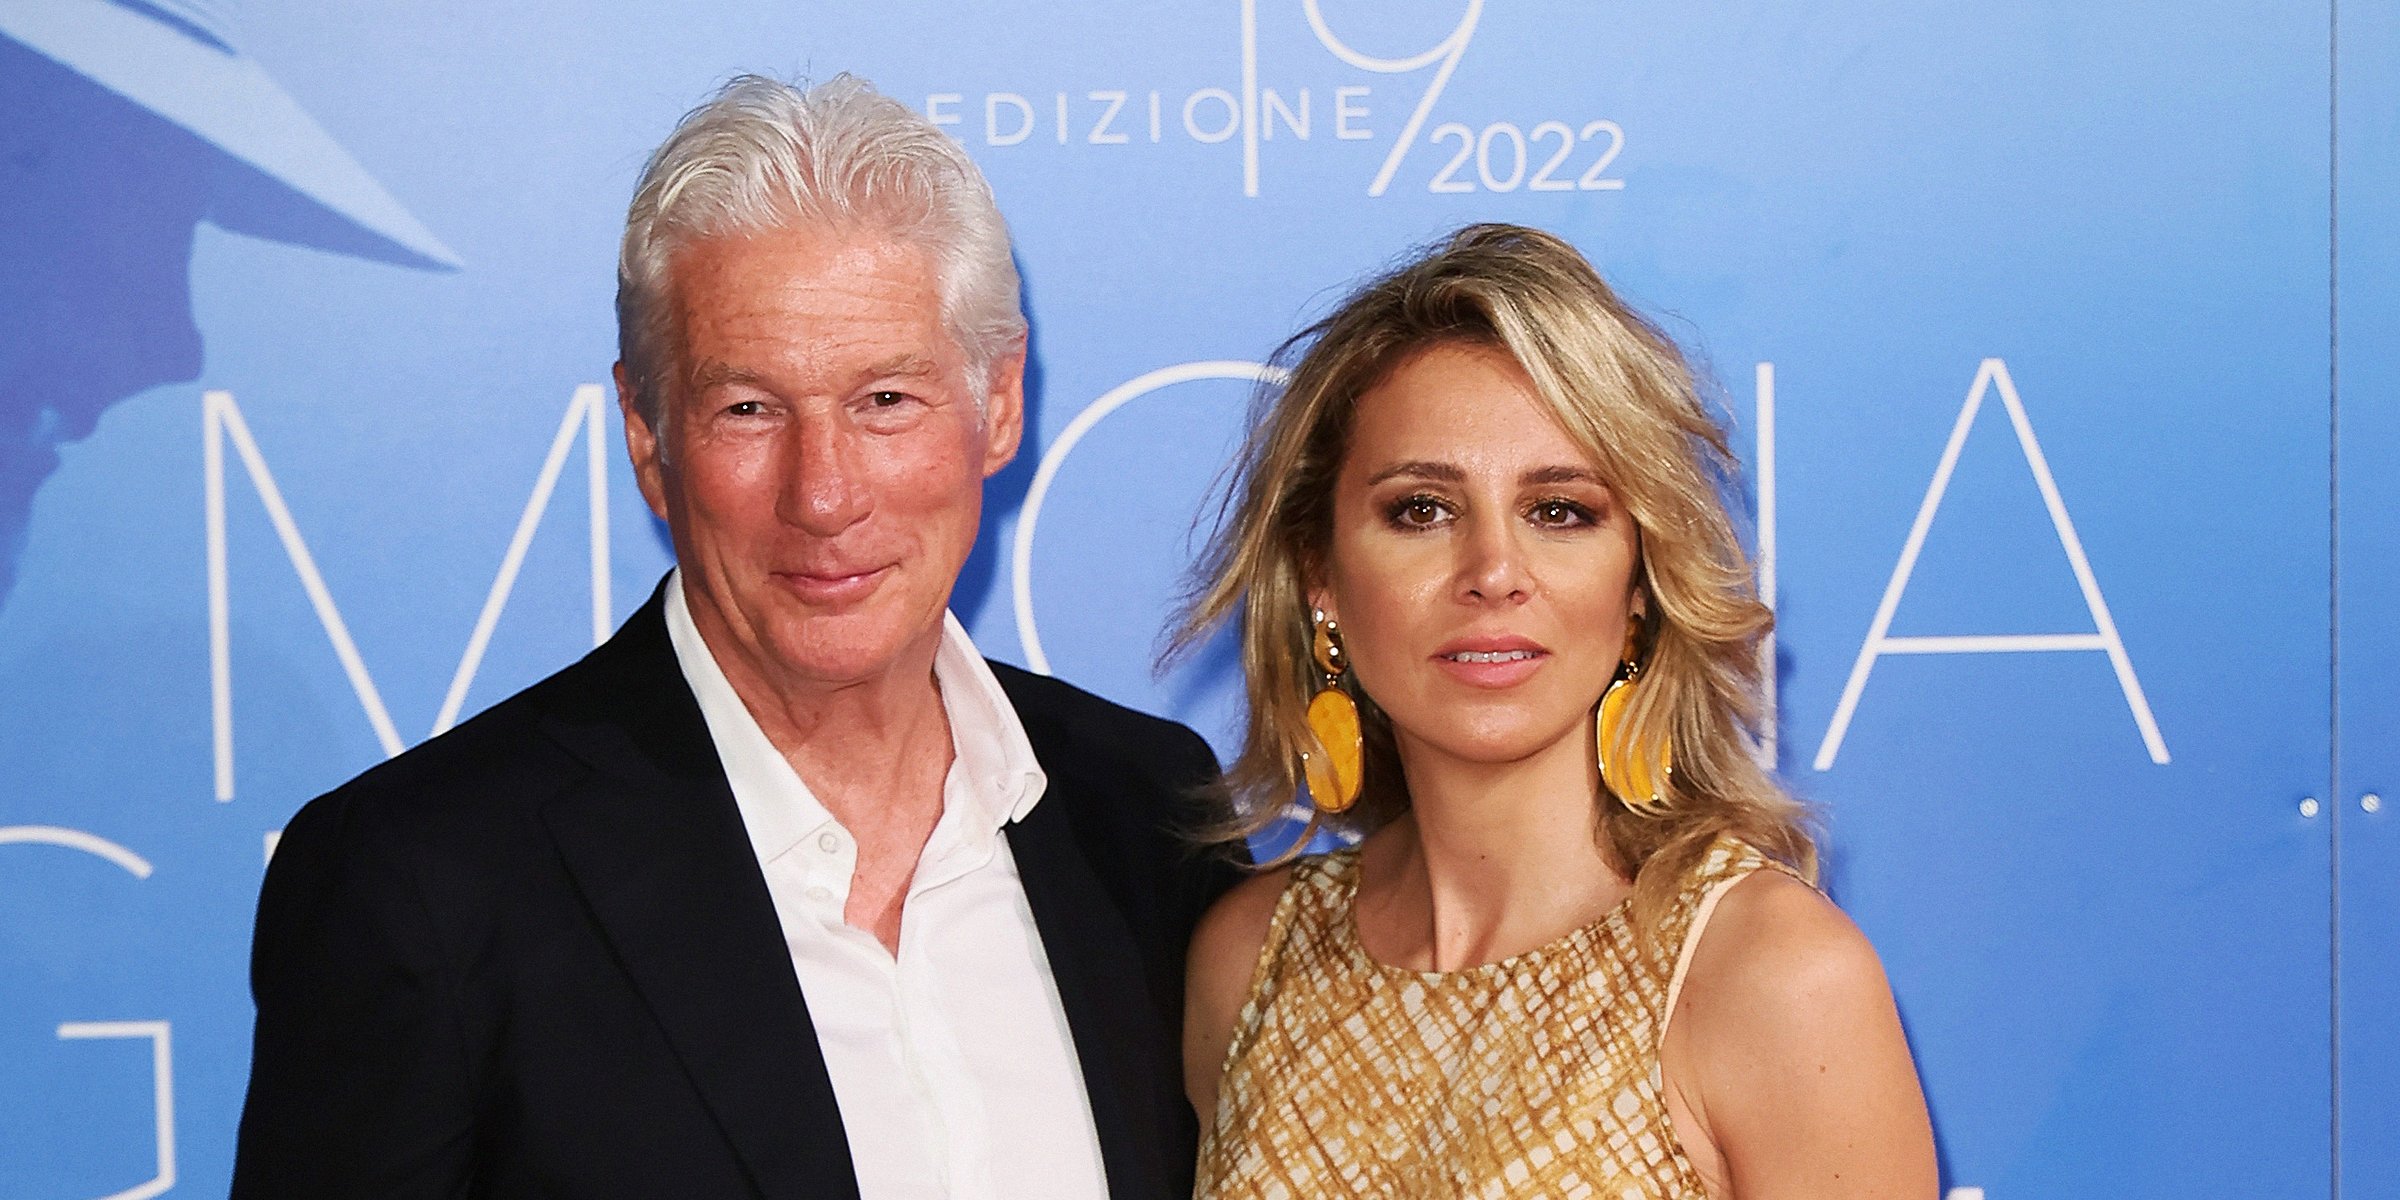 Richard Gere and Alejandra Silva┃Source: Getty Images